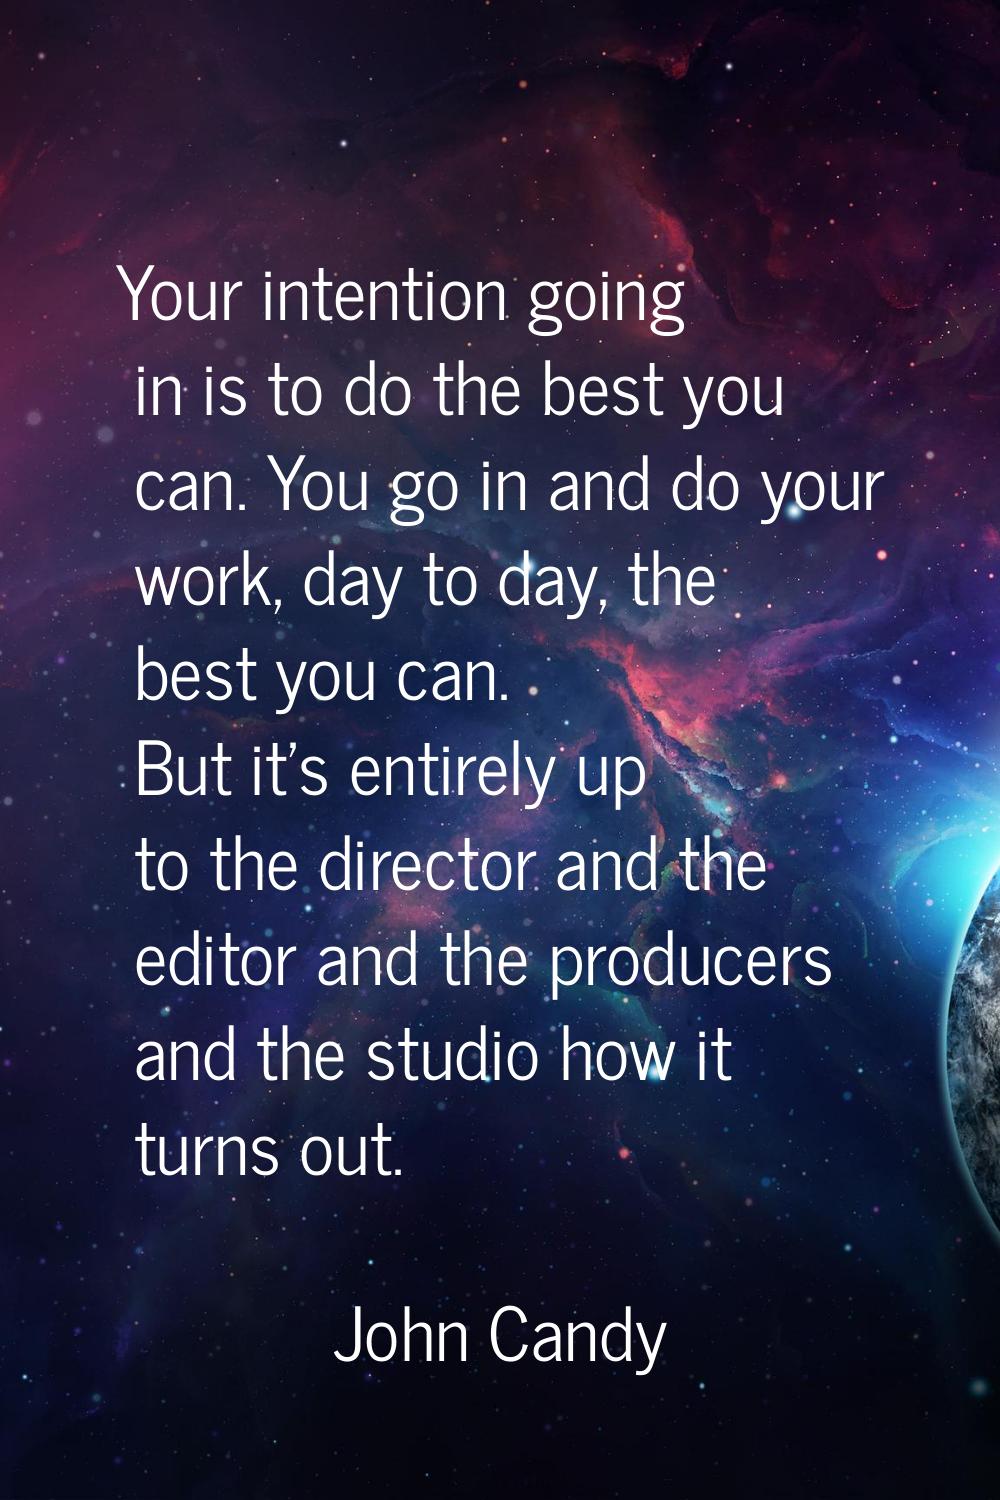 Your intention going in is to do the best you can. You go in and do your work, day to day, the best